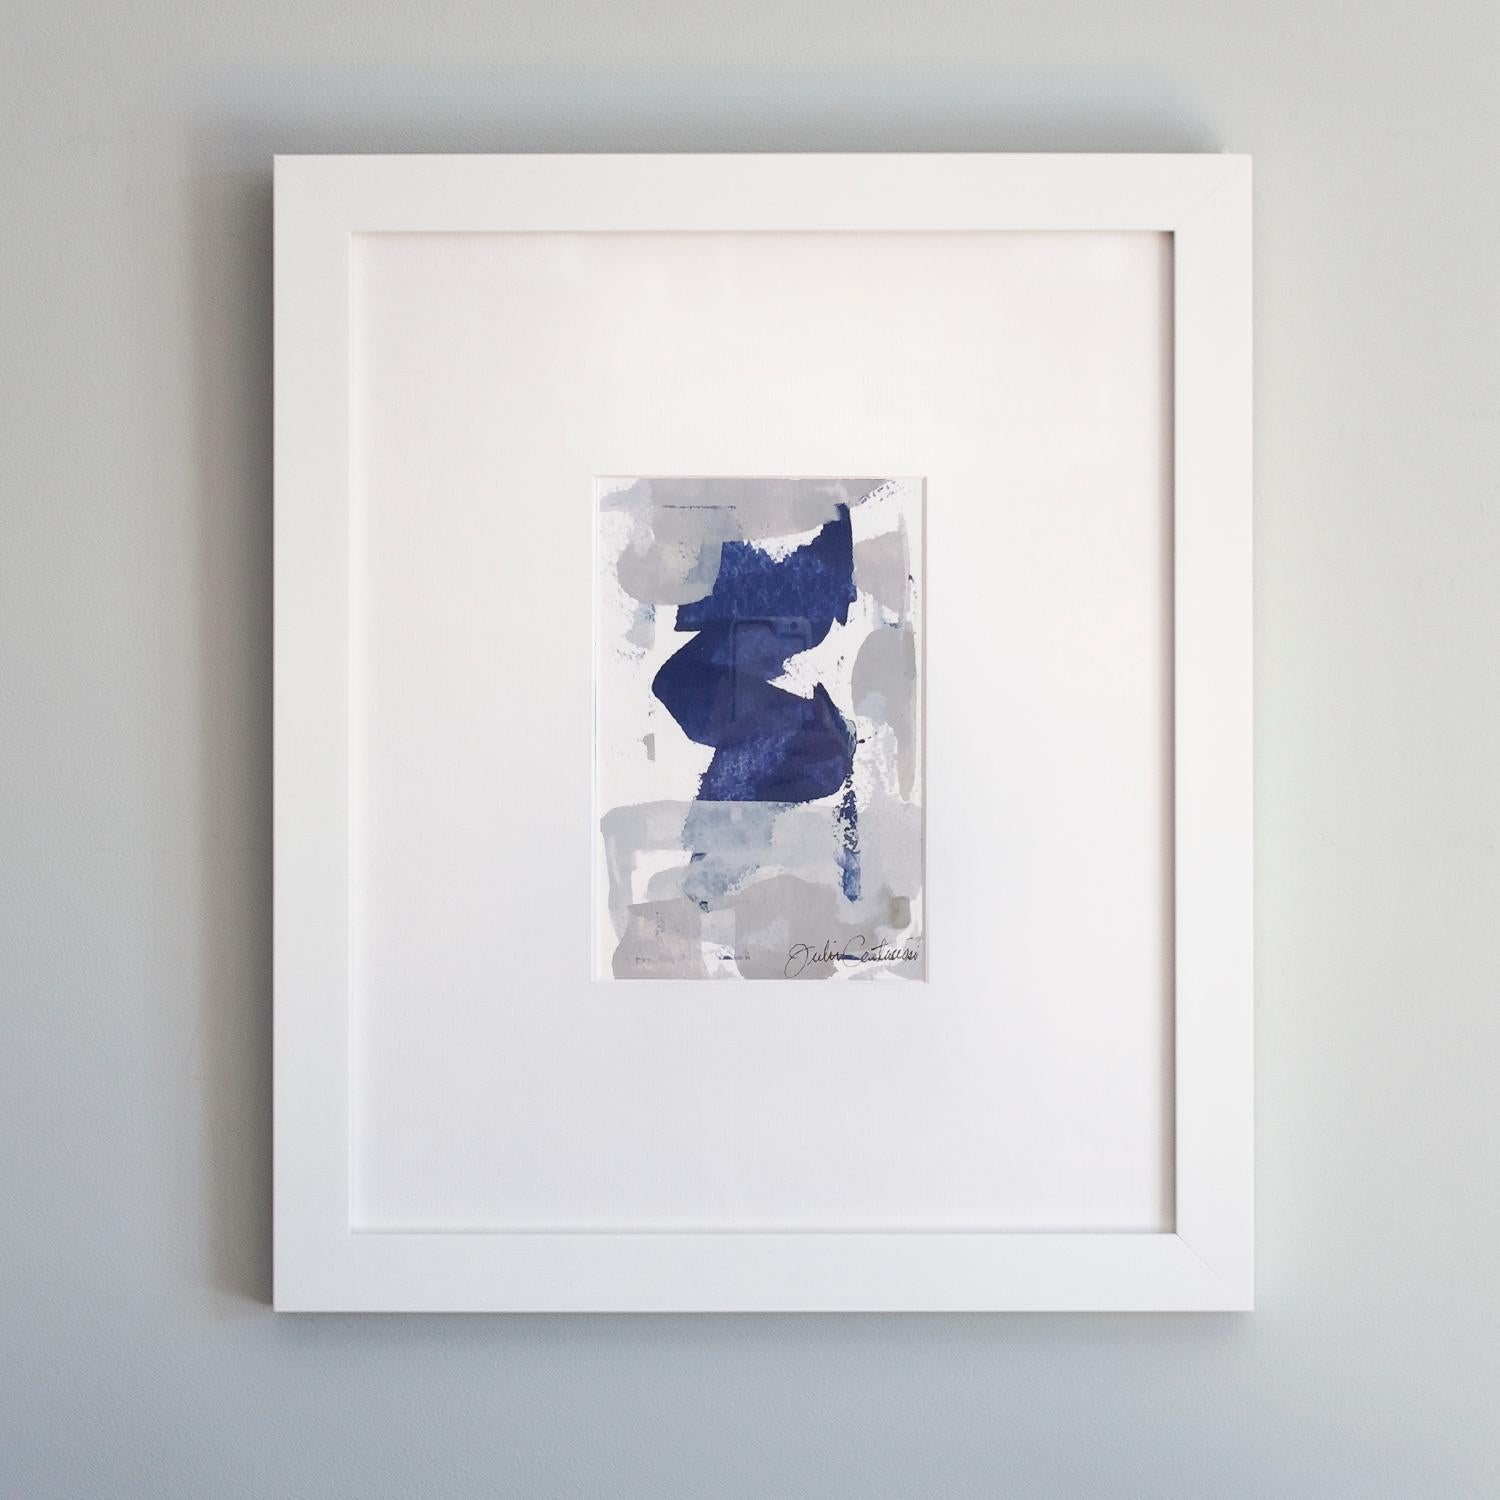 Abstract, abstract art, blue, royal blue, deep blue, pastel blue, light blue, silver, white, grey, pair, series, color study, expressive, brushstrokes, lines, texture, contemporary, movement, framed art, acrylic paint, acrylic on paper, framed